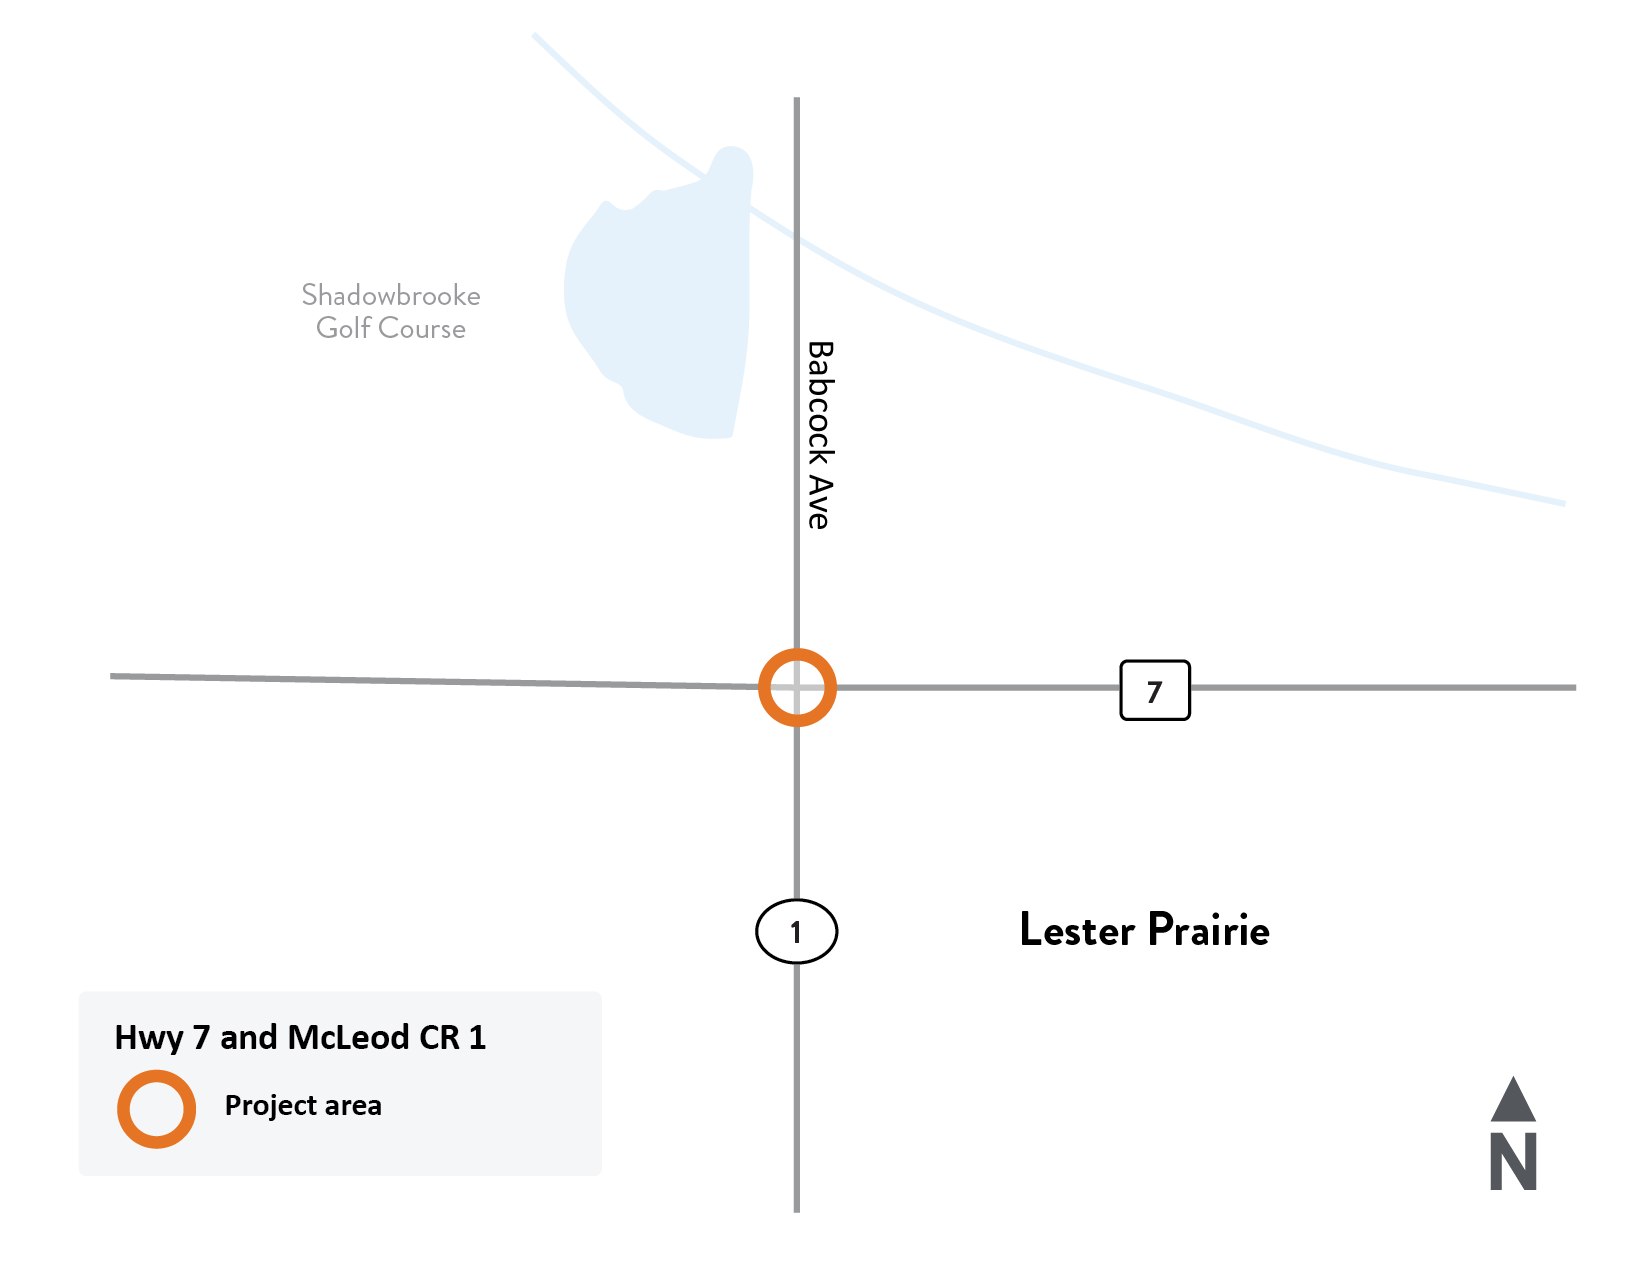 Map of intersection of Hwy 7 and CR 1 near Lester Prairie